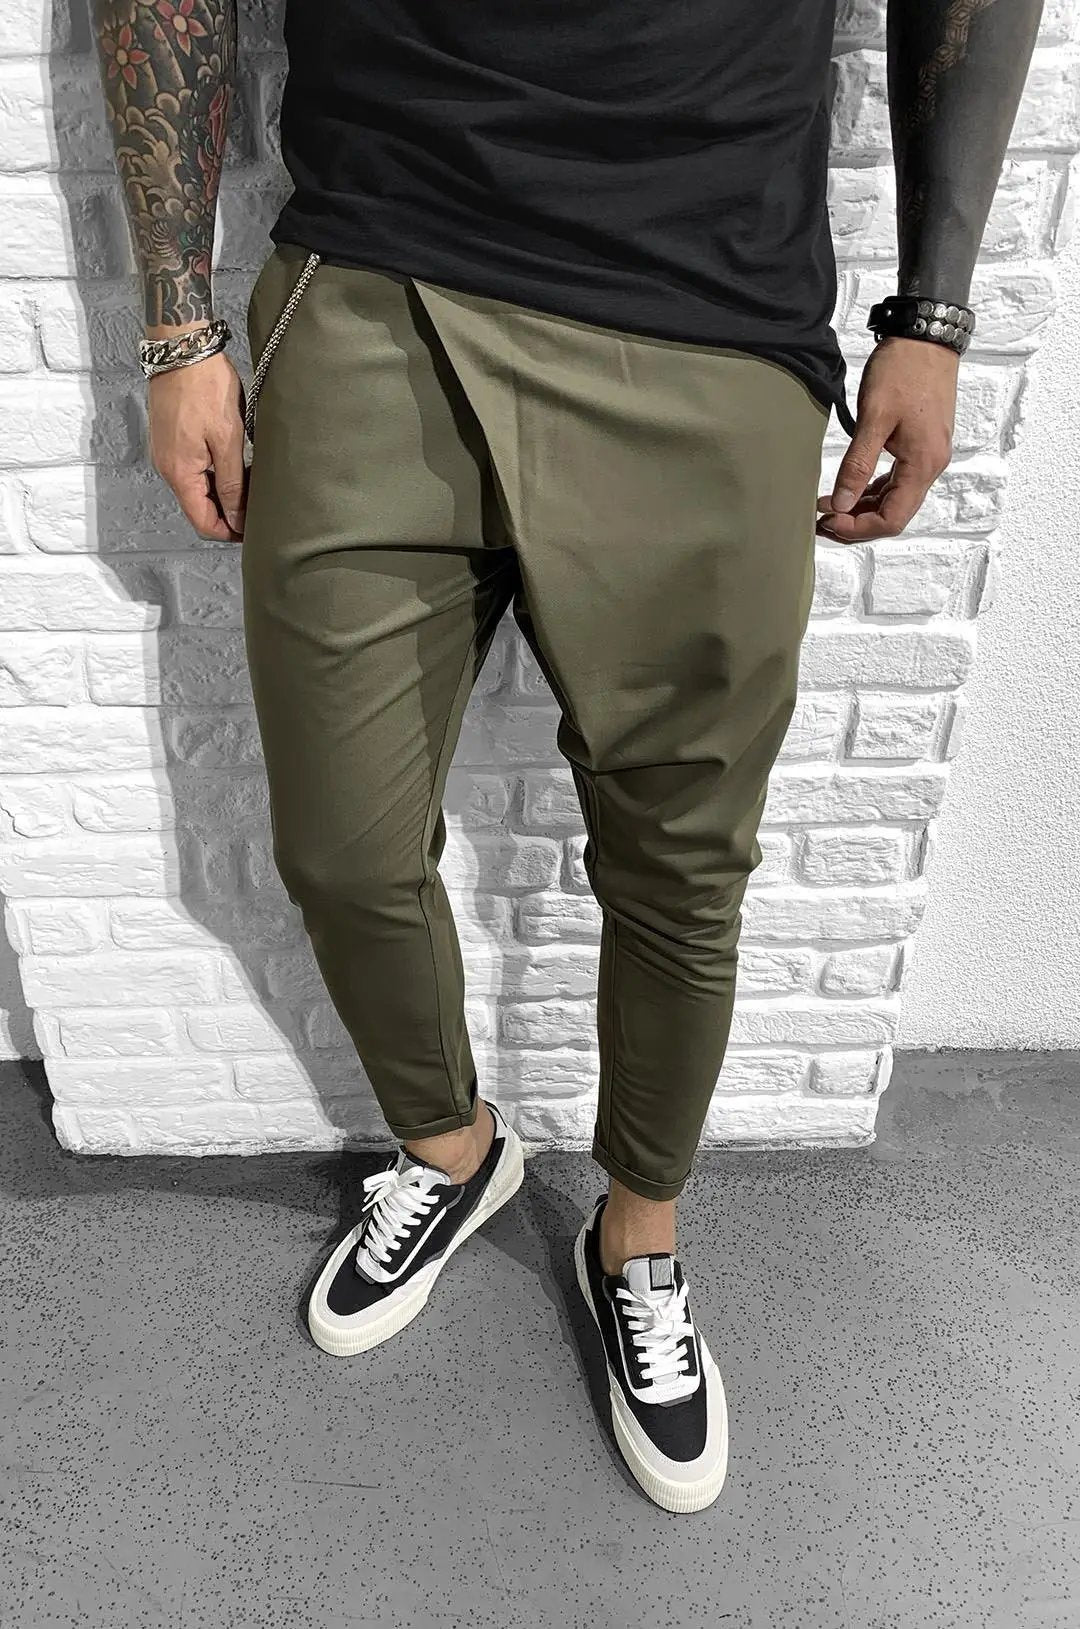 A man in ASSYMMETRIC ROLL UP - KHAKI pants with a comfortable fit standing next to a brick wall.